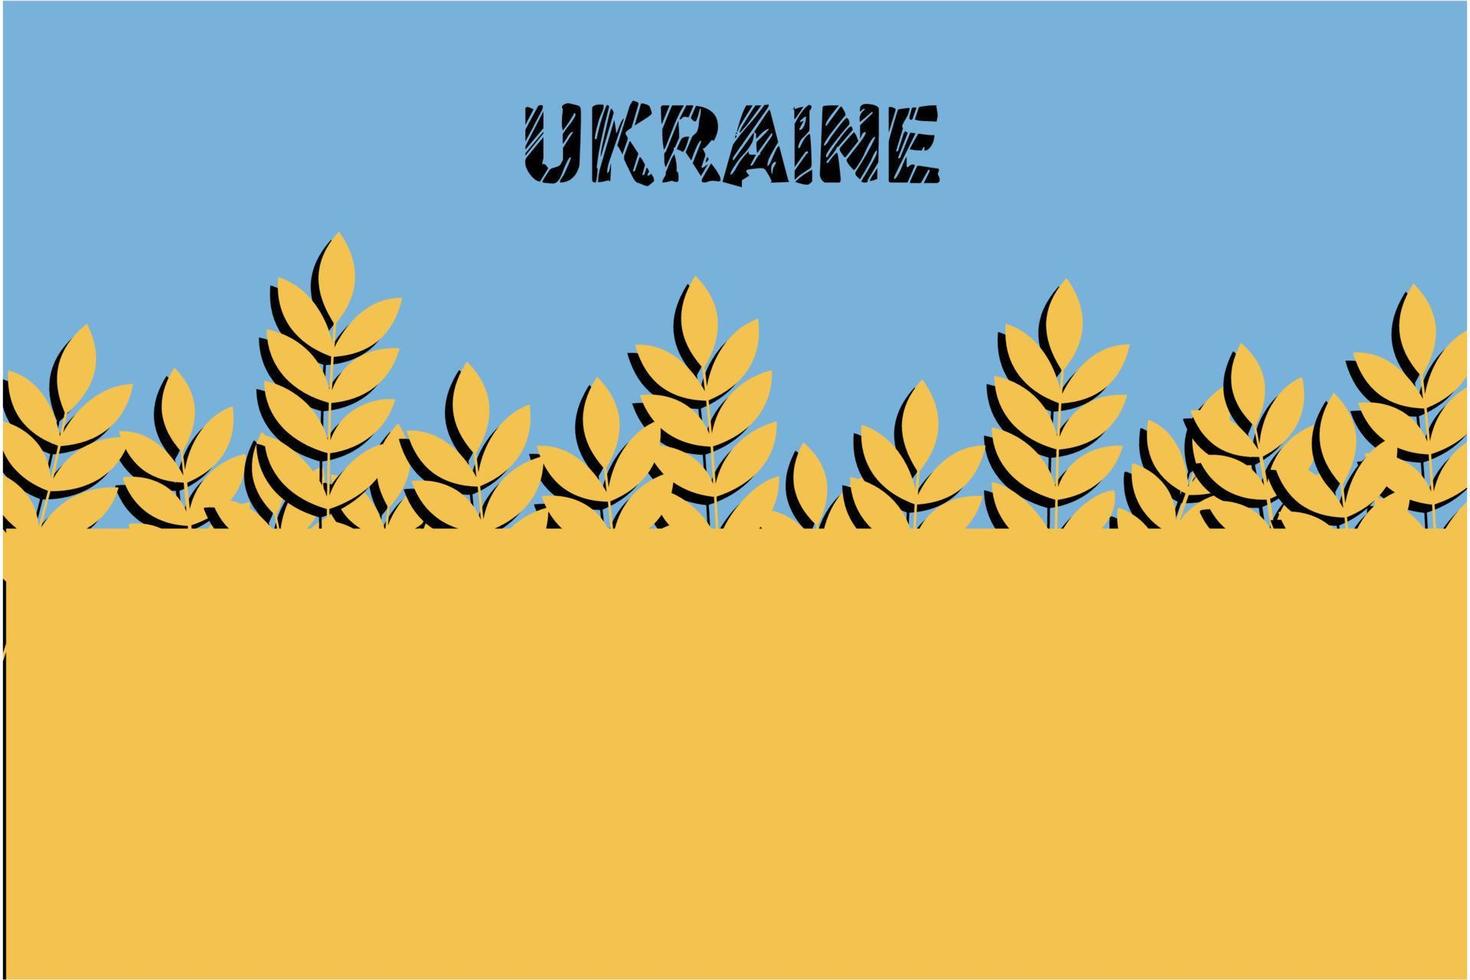 spikelets in the field develop under blue skies vector